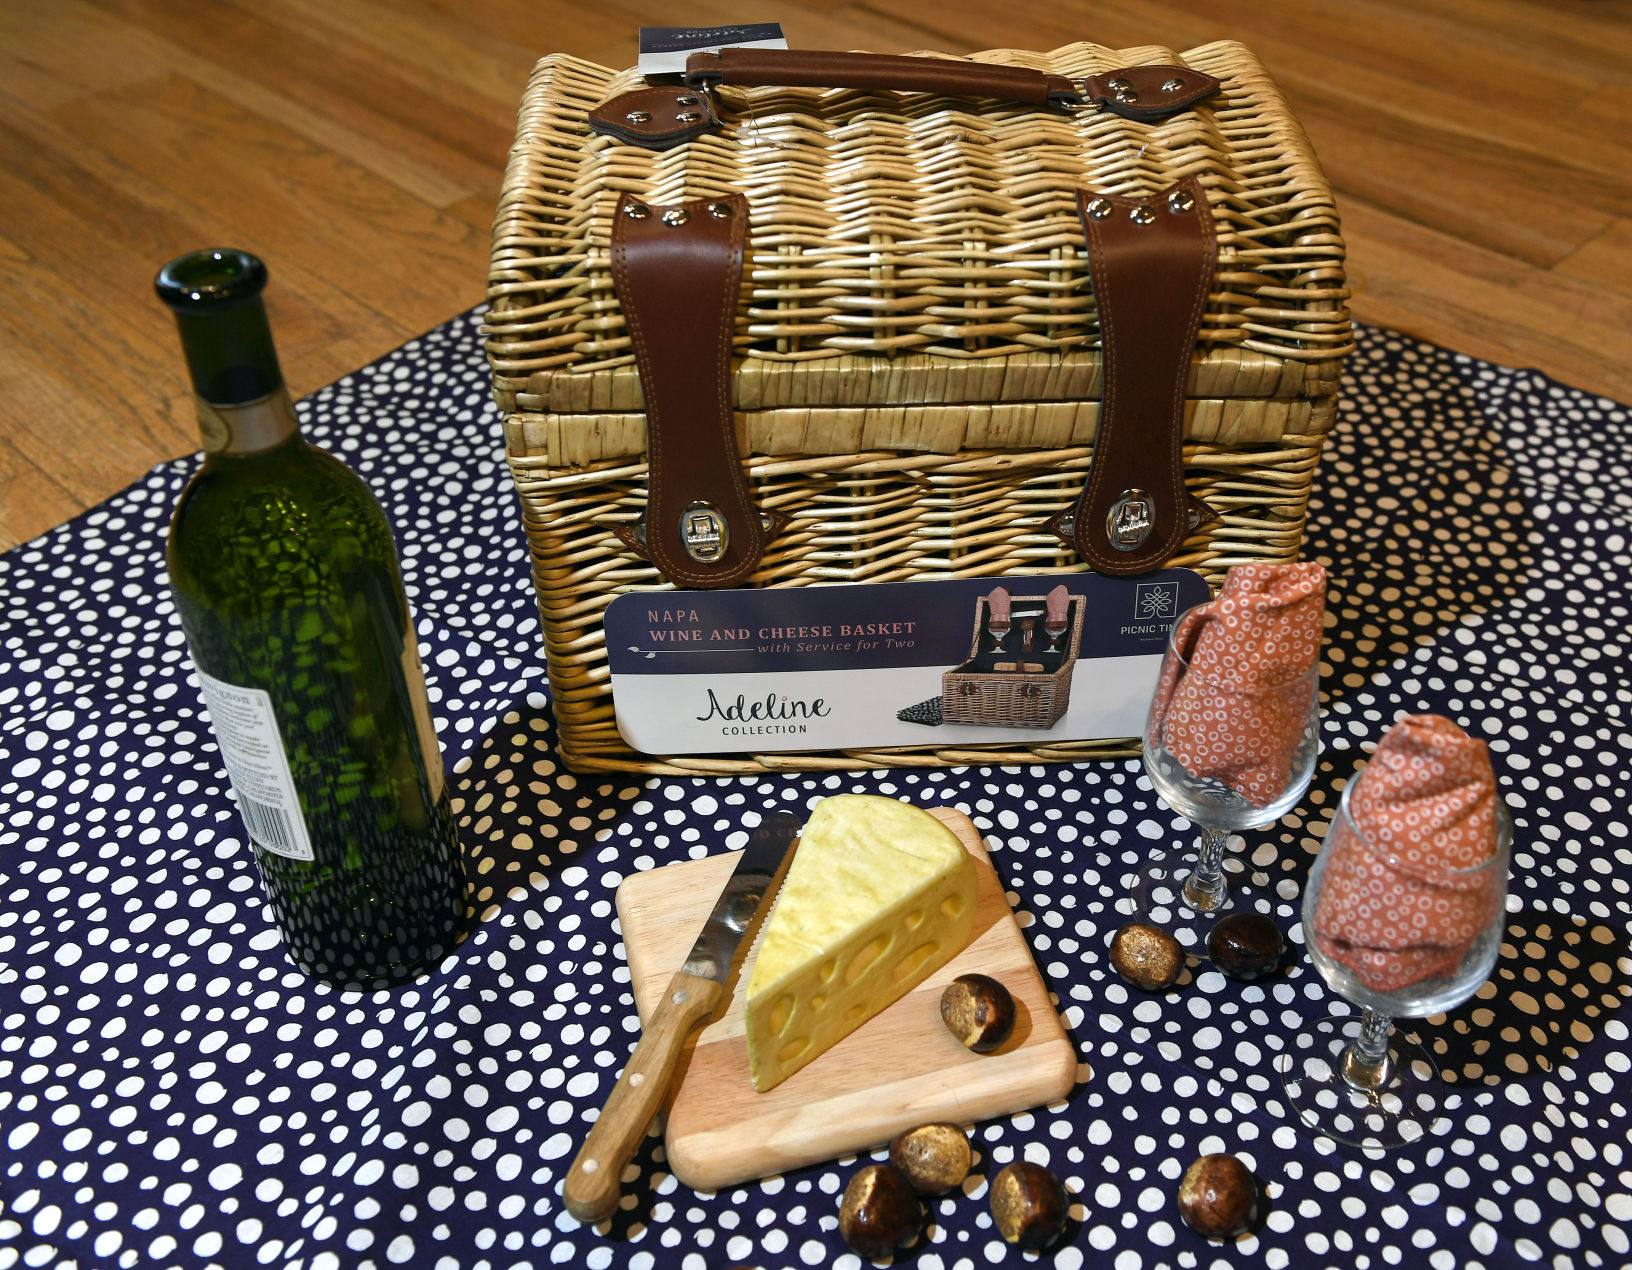 Adeline Collection Picnic Time Napa Picnic Basket with Wine and Cheese Service for Two